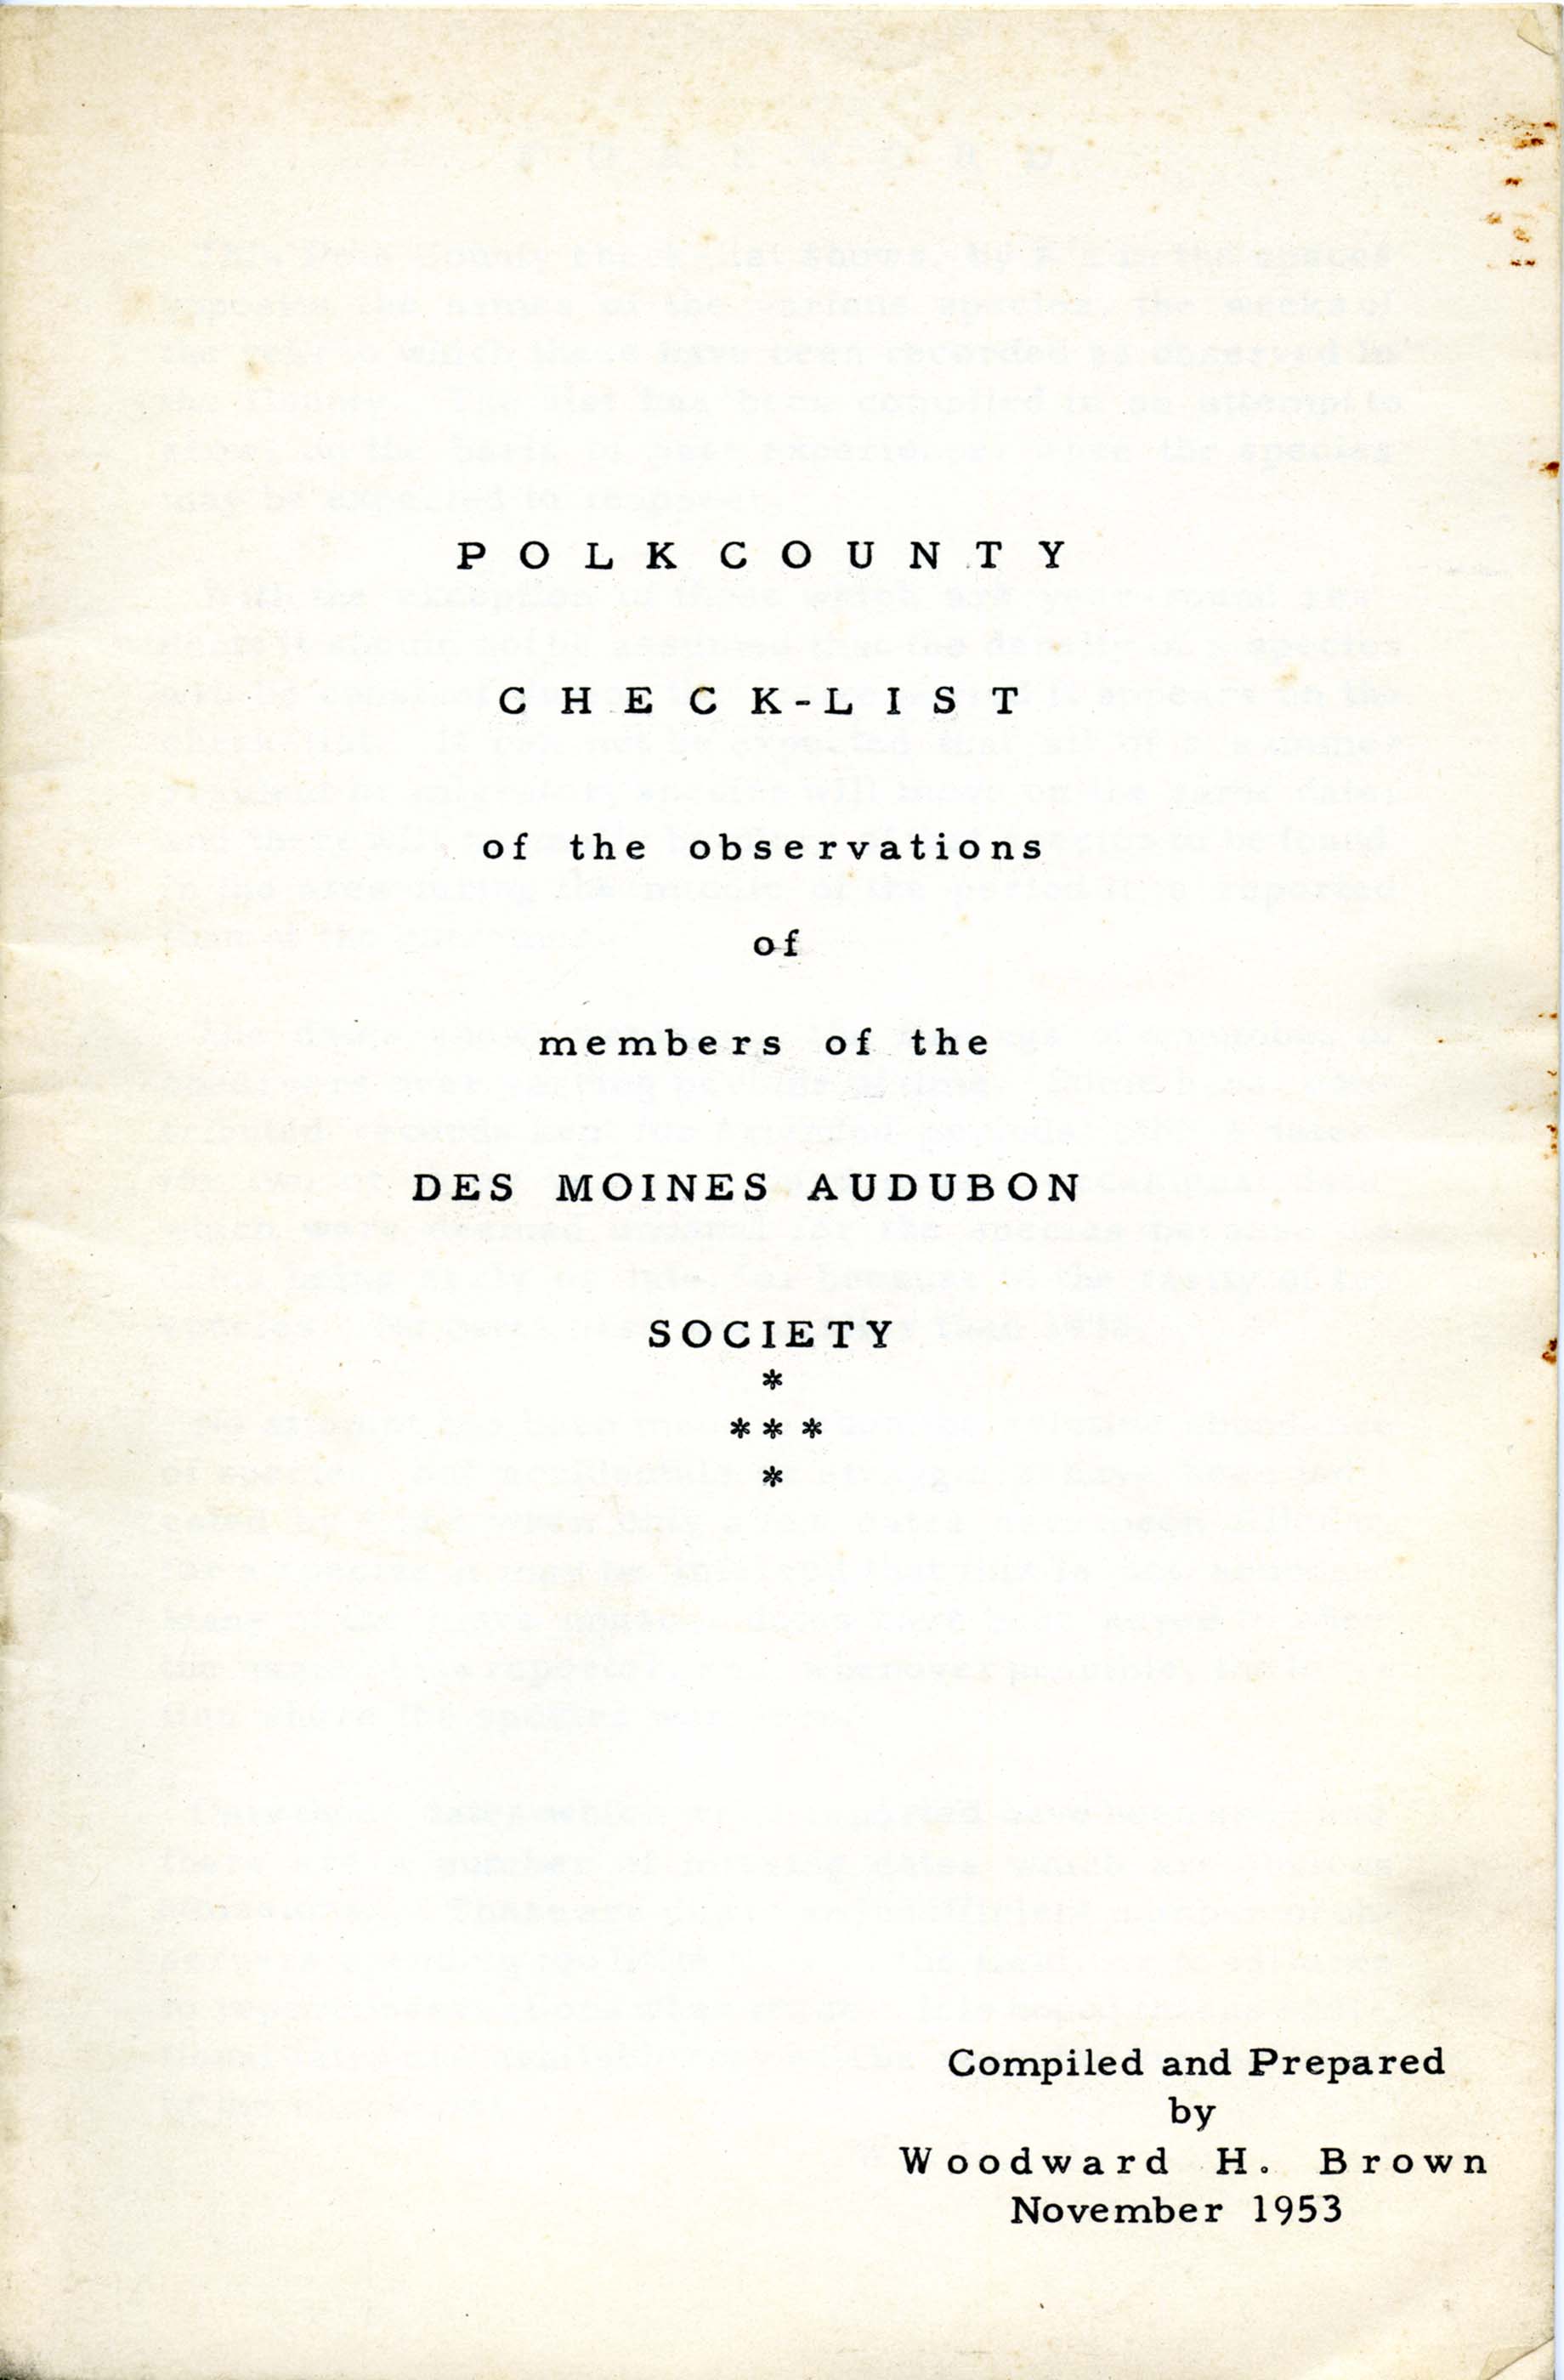 Polk County check-list of the observations of members of the Des Moines Audubon Society